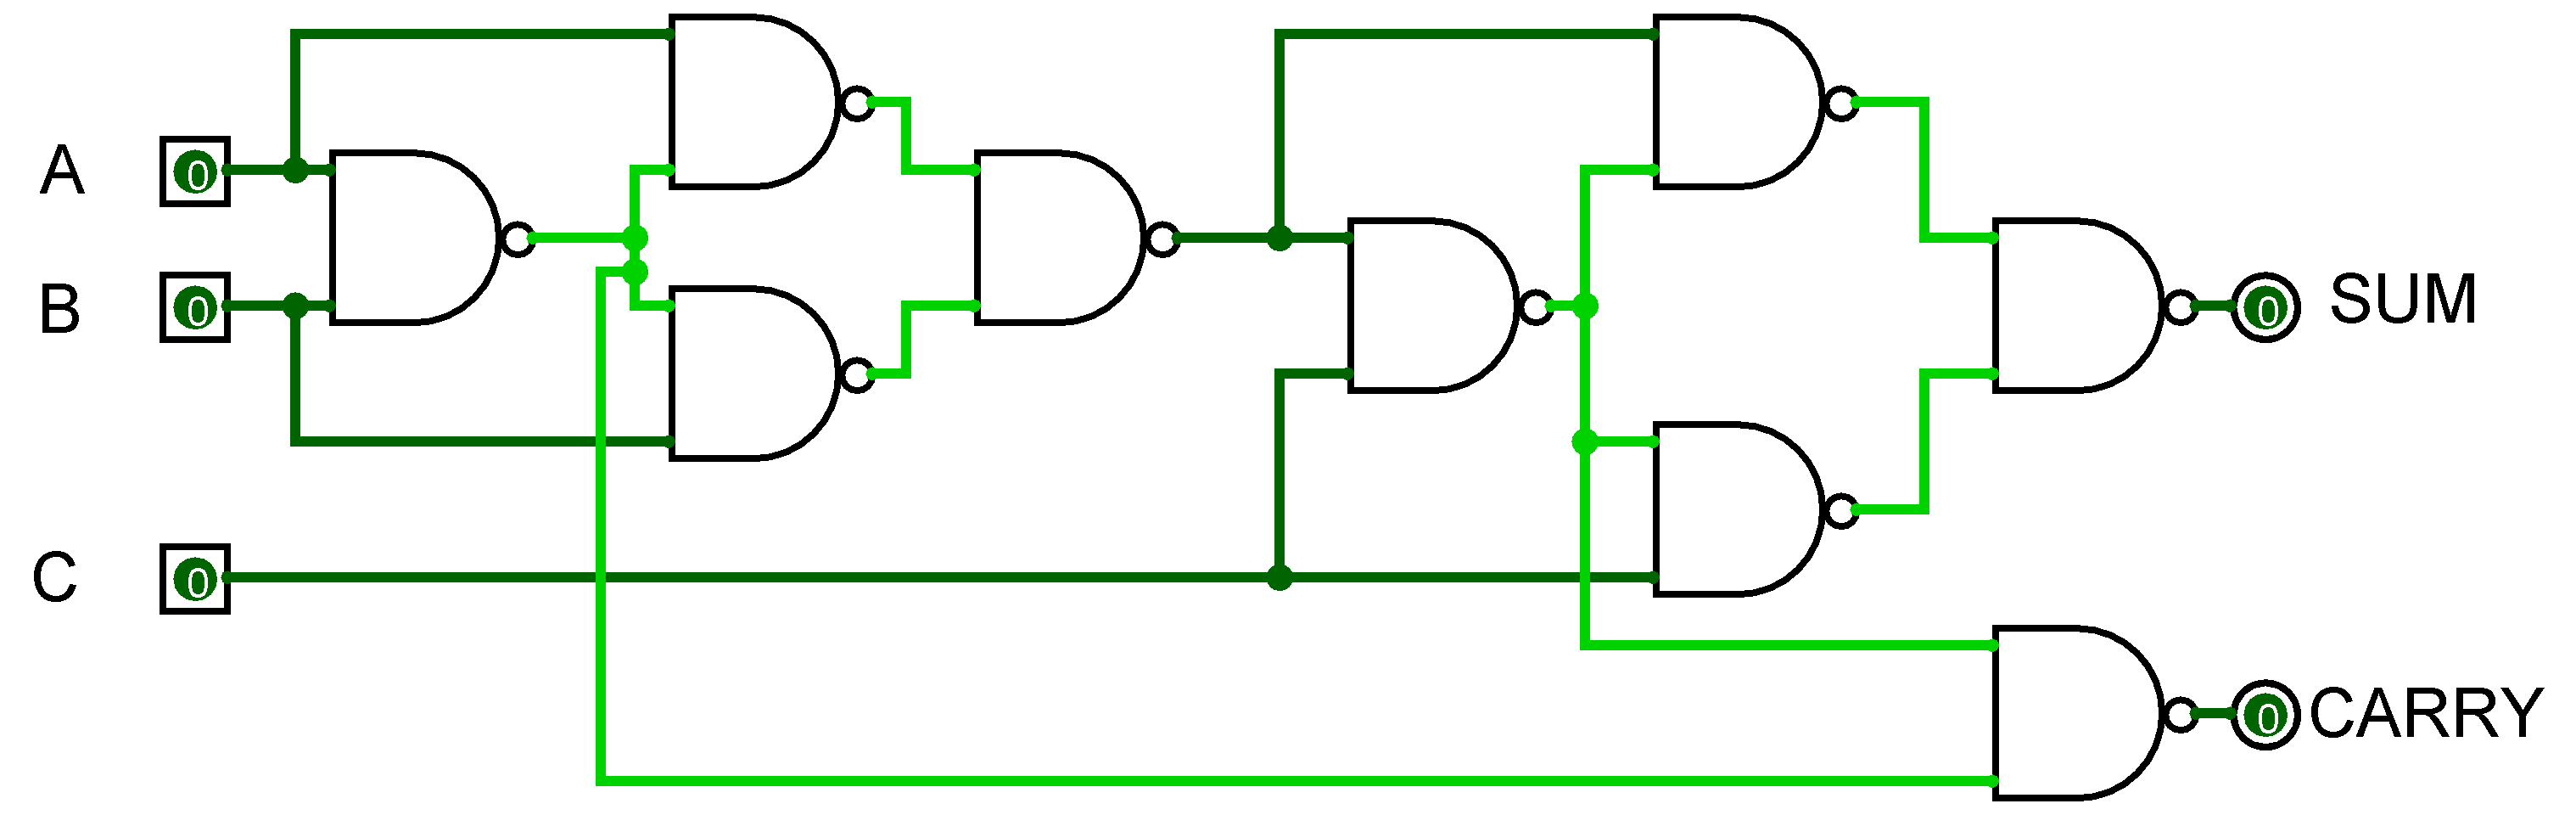 Circuit Diagram For Nand Gate